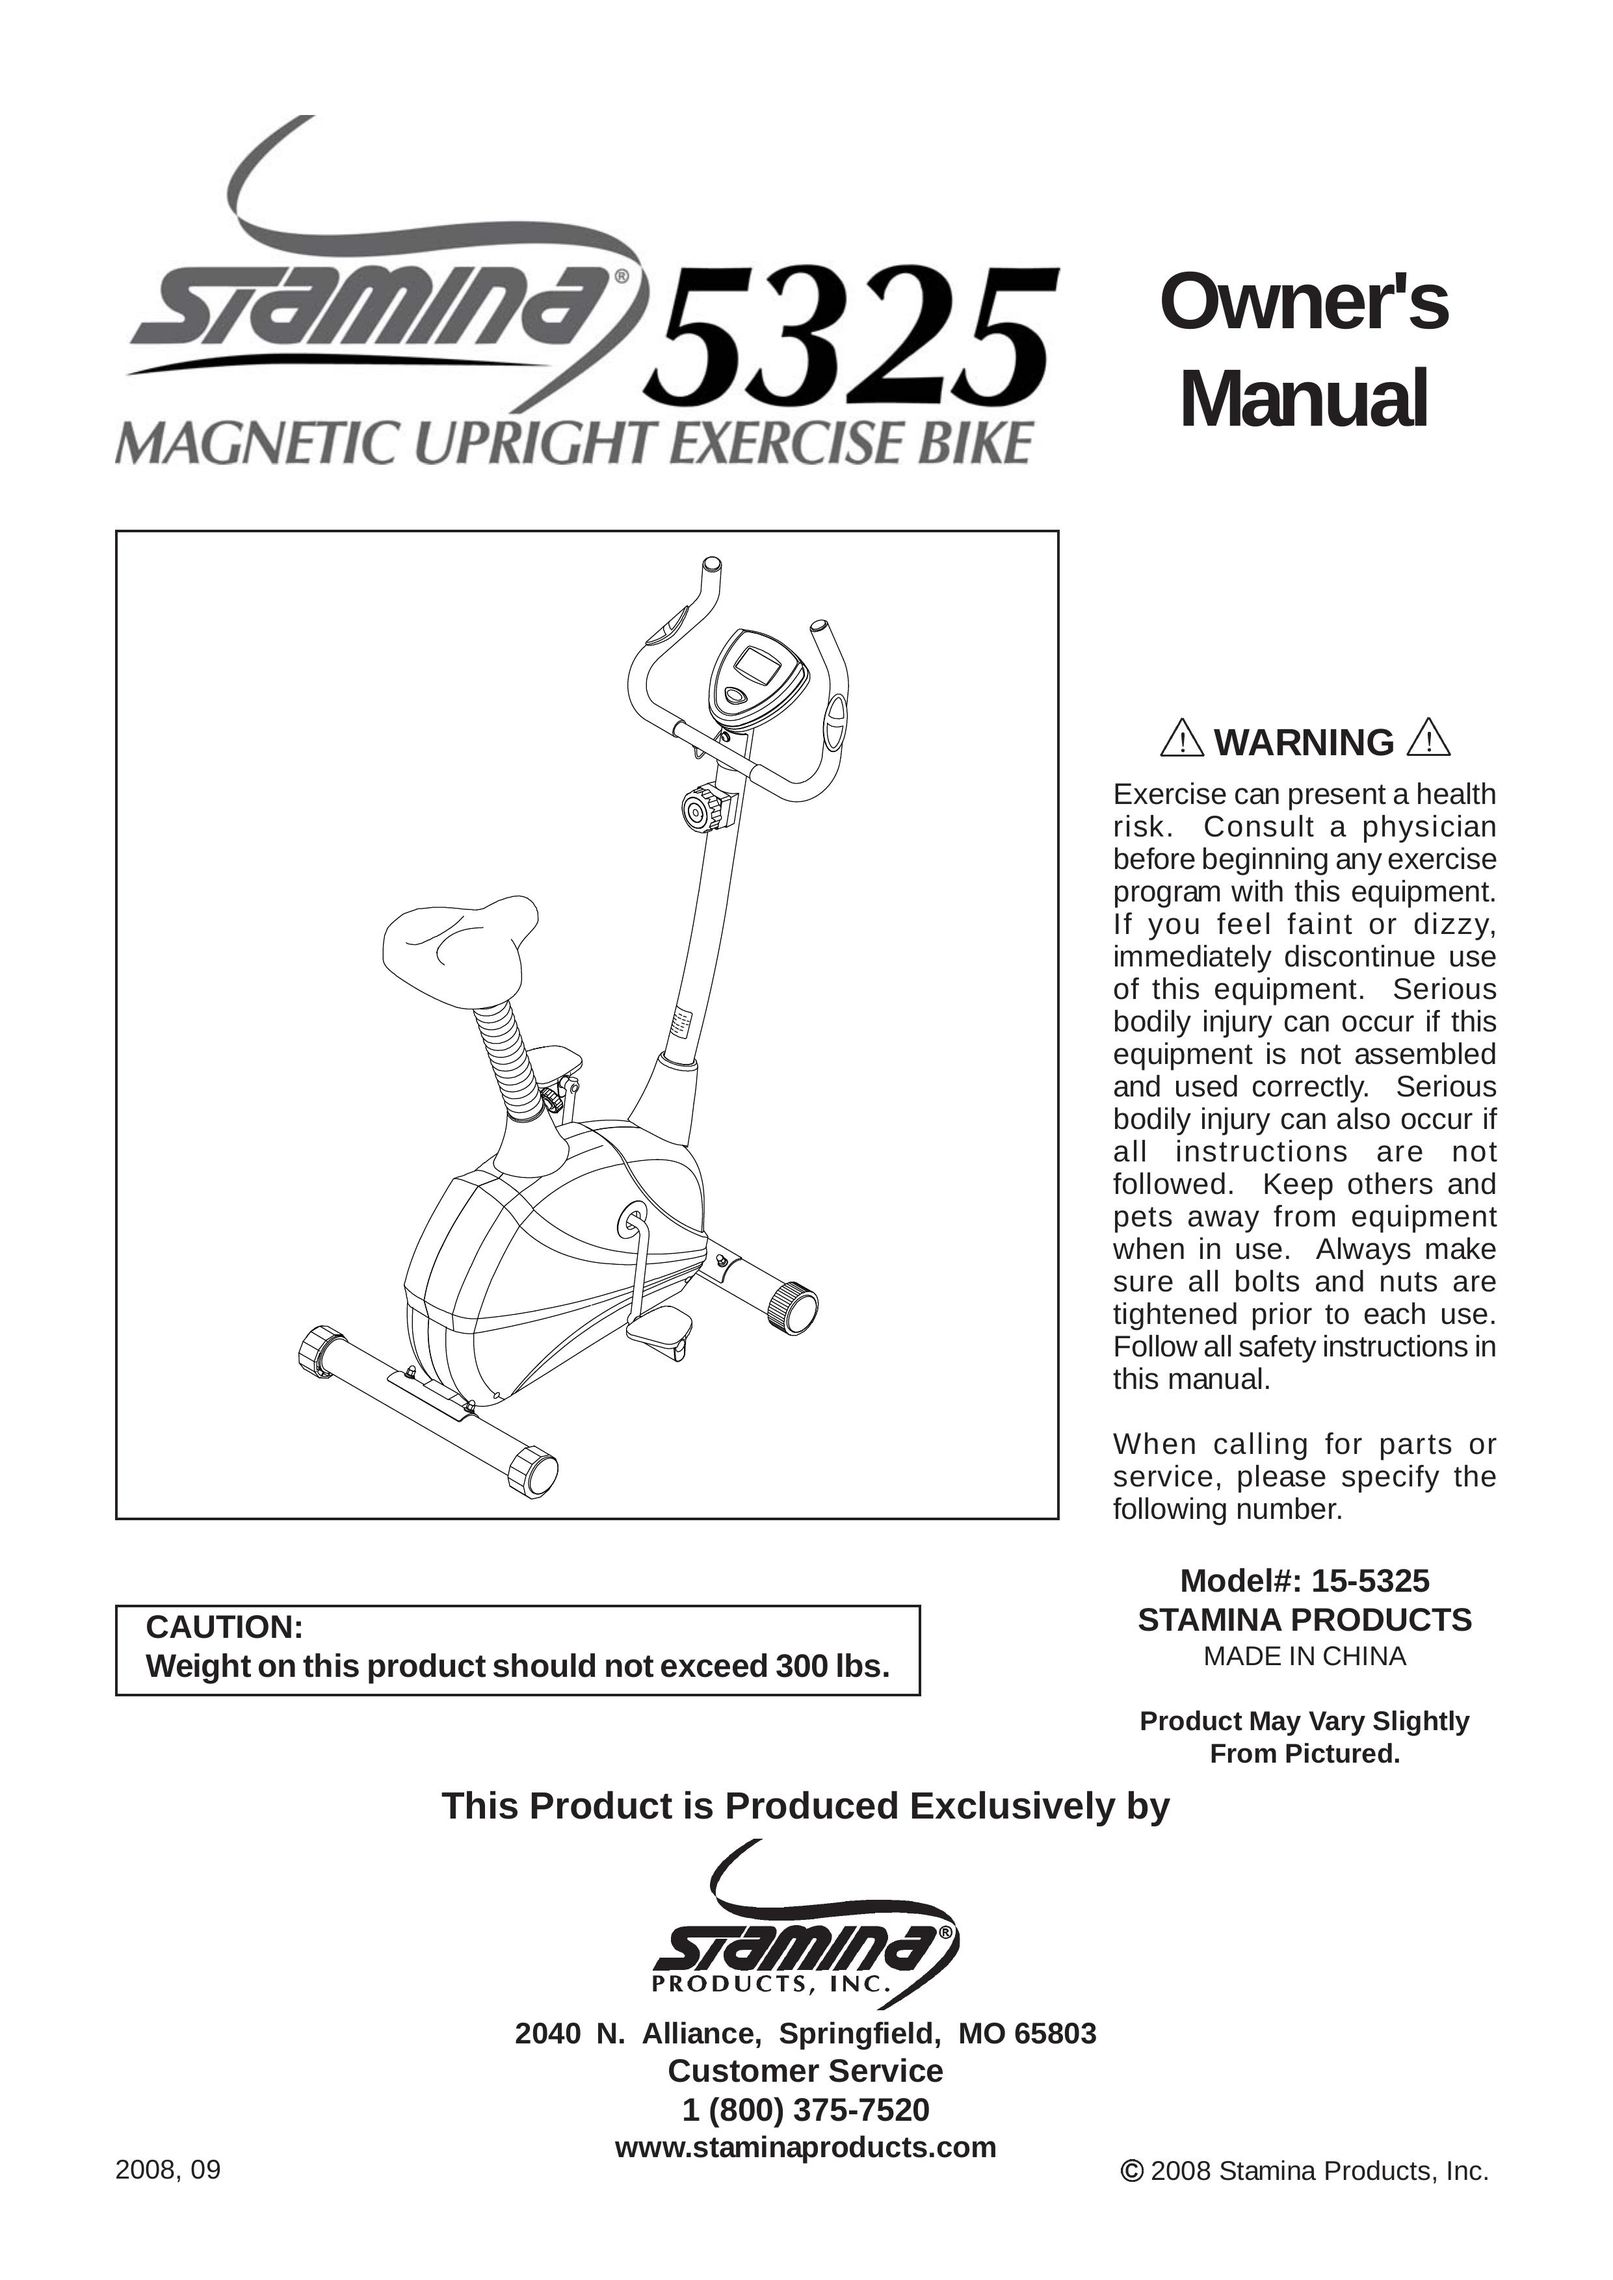 Stamina Products 15-5325 Bicycle User Manual